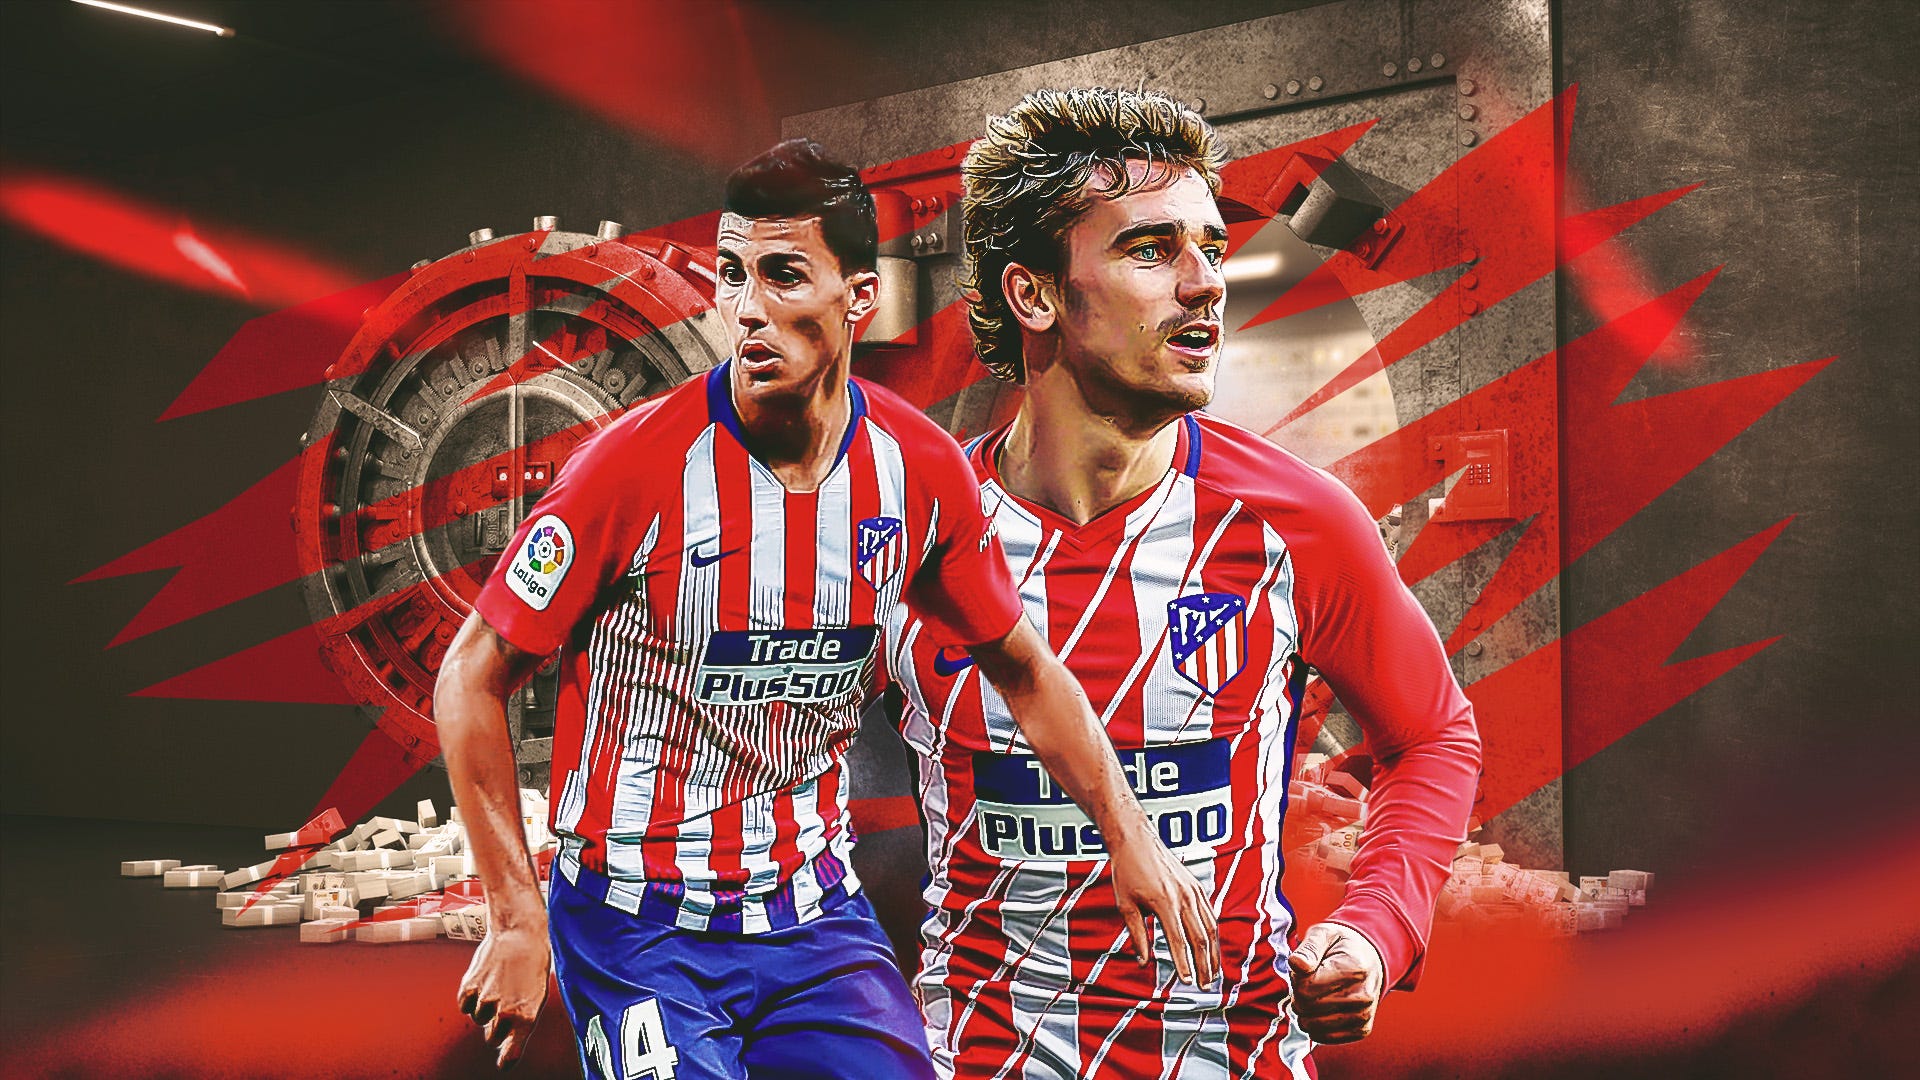 atletico madrid red jersey